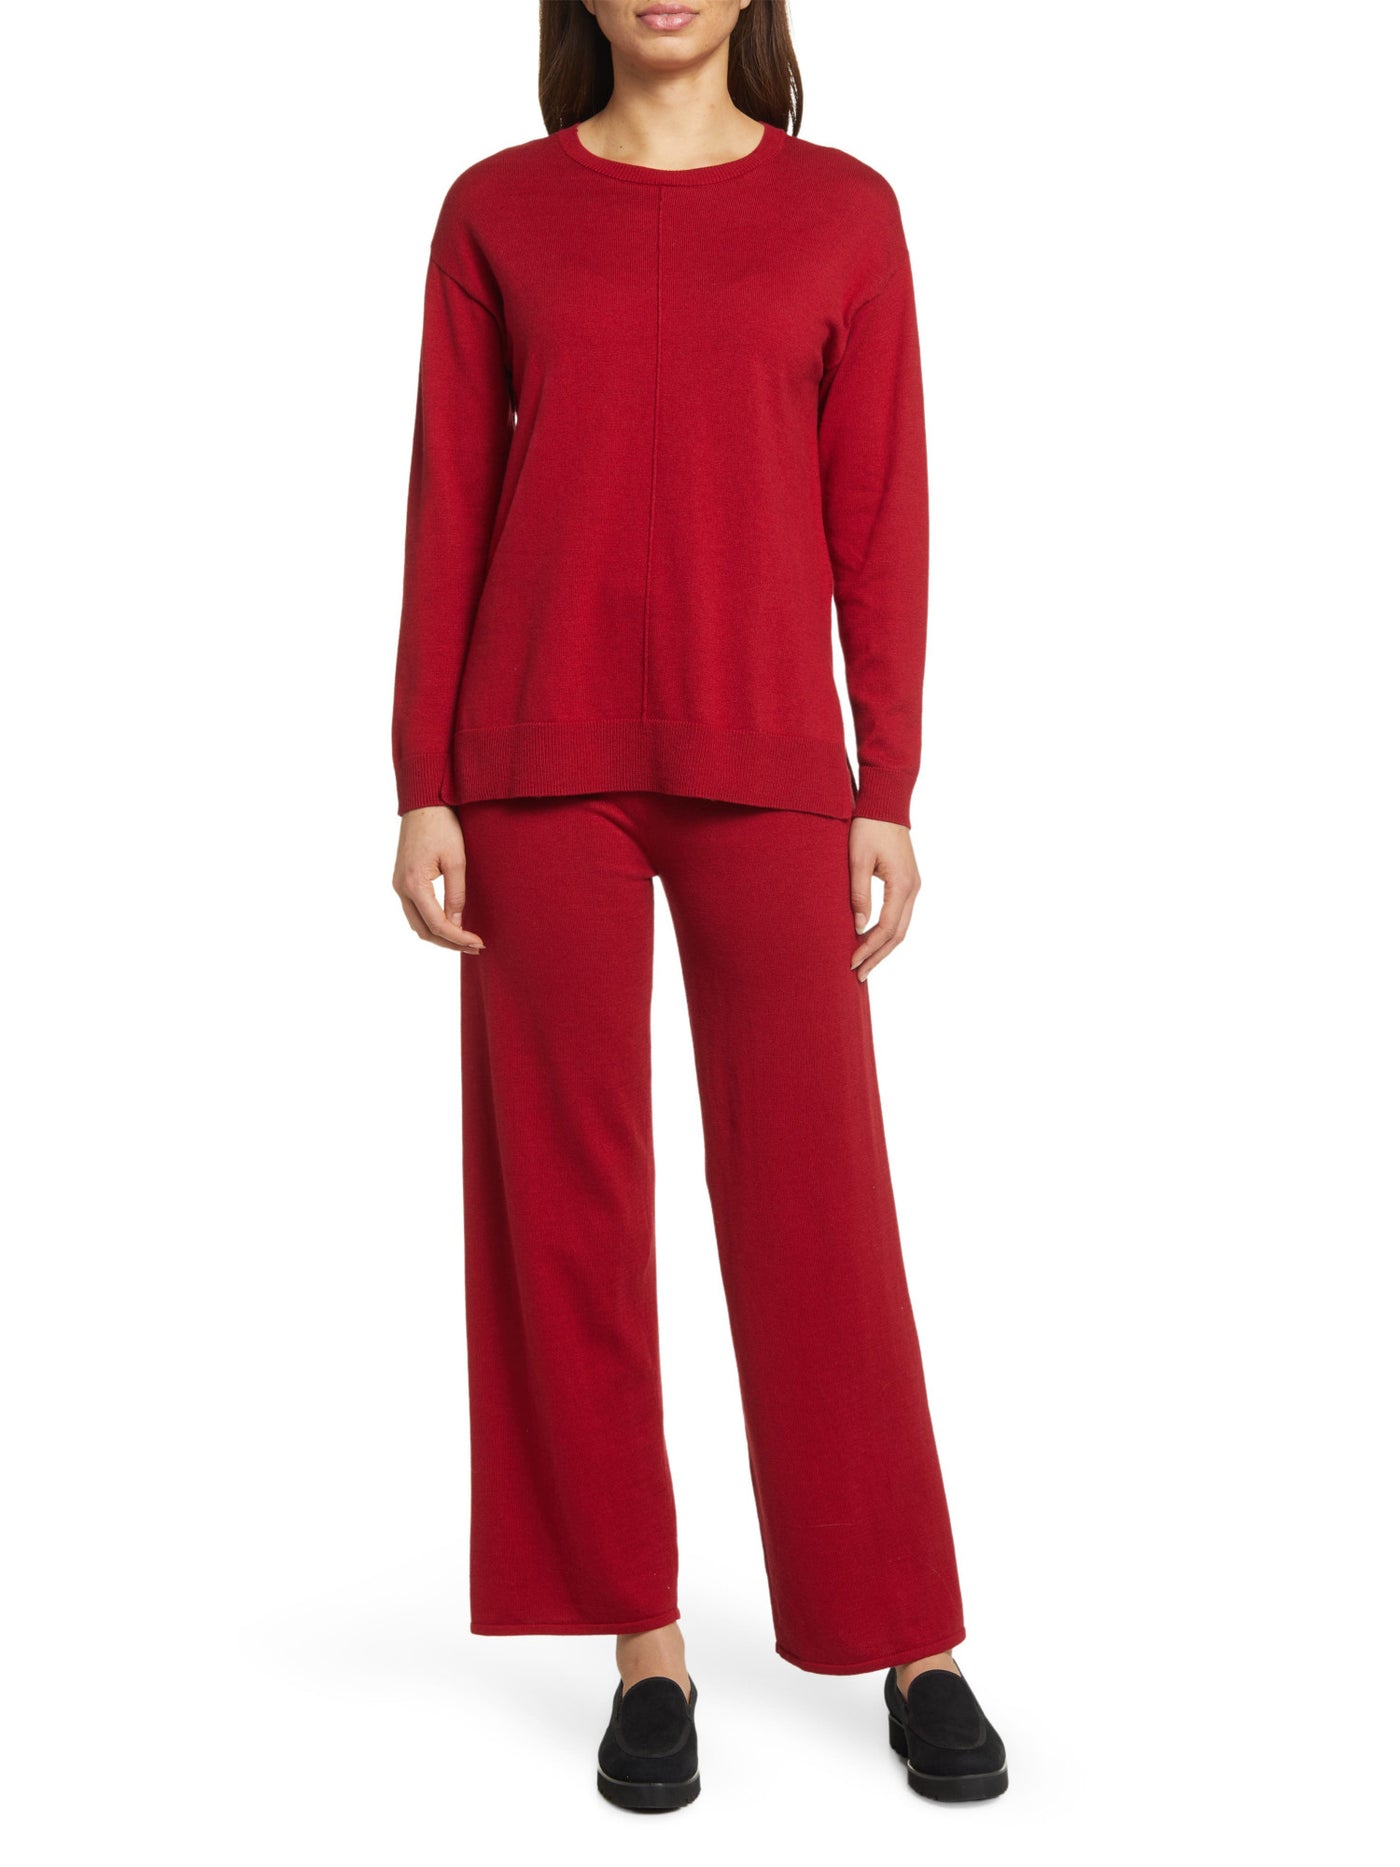 ANNE KLEIN Womens Red Long Sleeve Crew Neck Sweater M